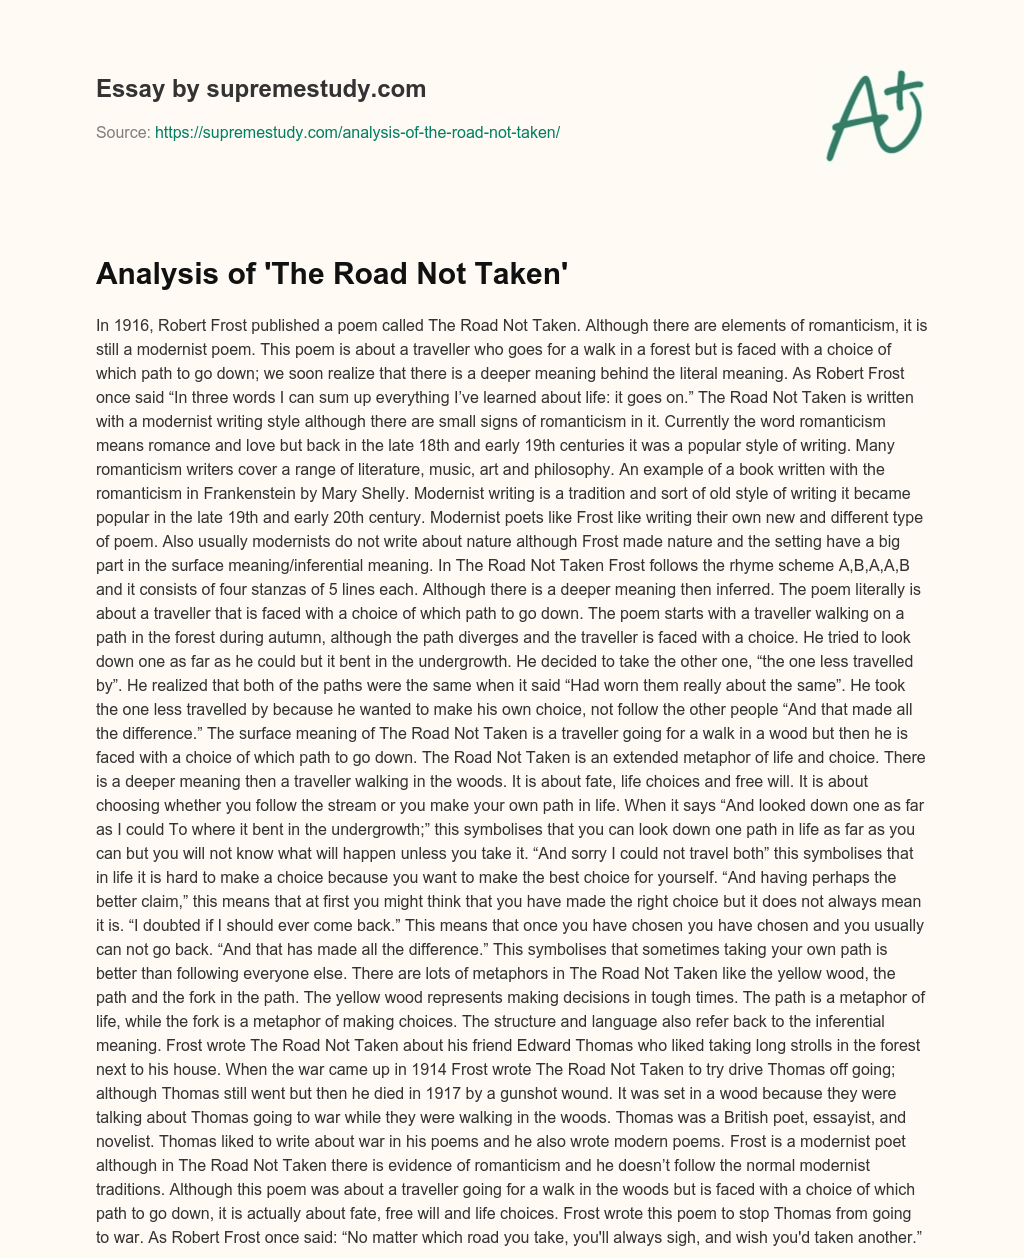 Analysis of ‘The Road Not Taken’ essay